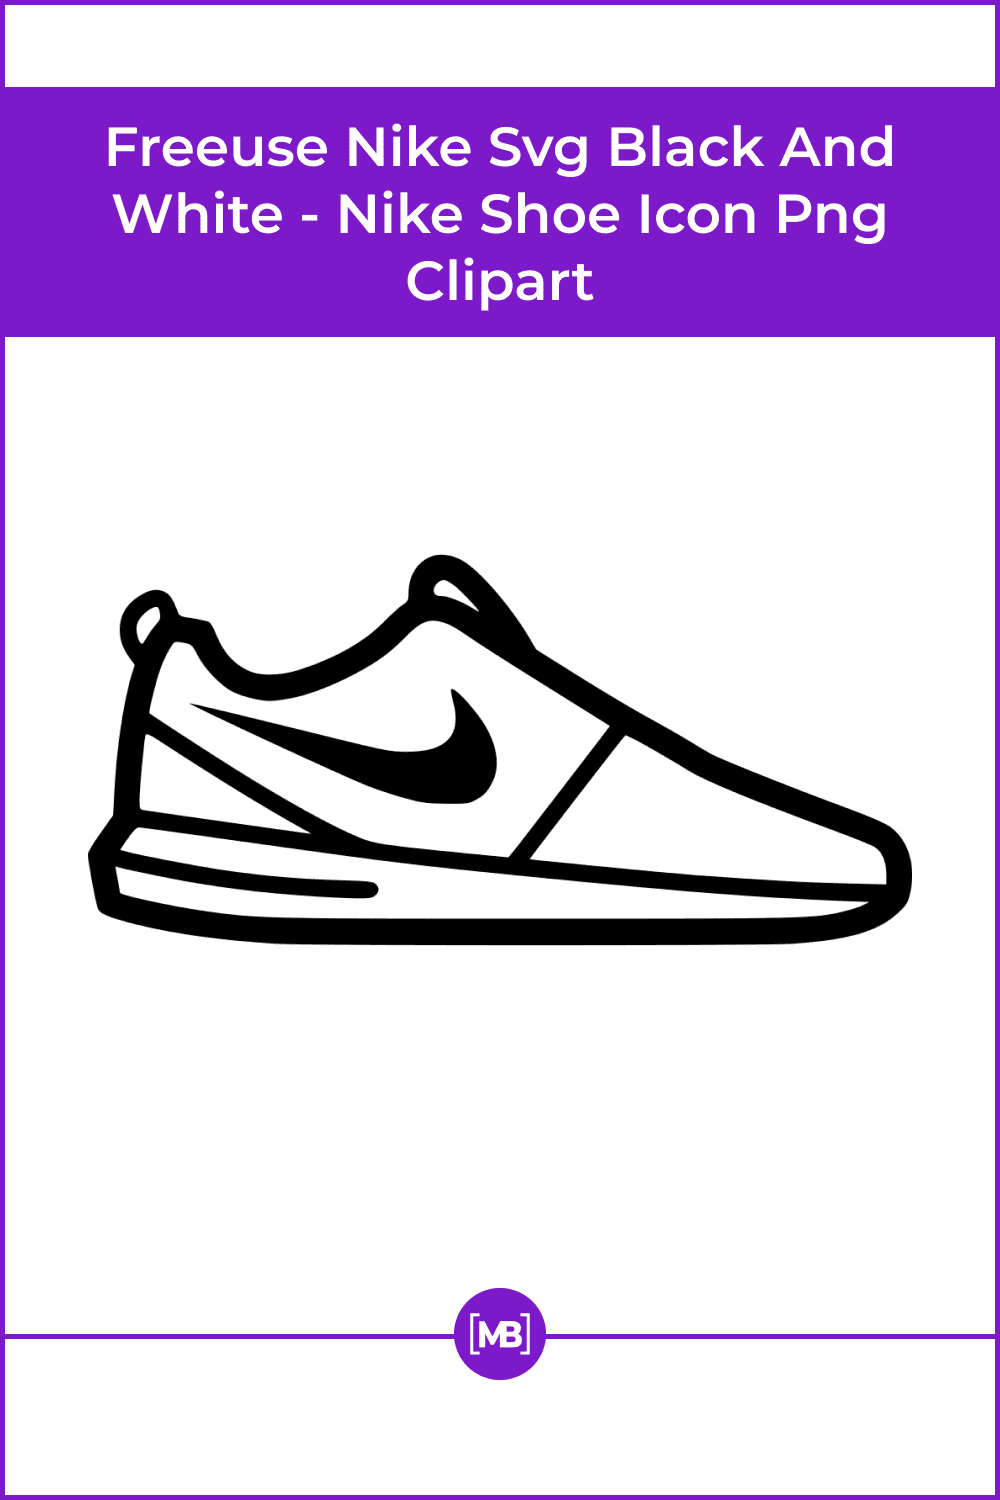 Freeuse nike svg black and white - nike shoe icon png clipart.